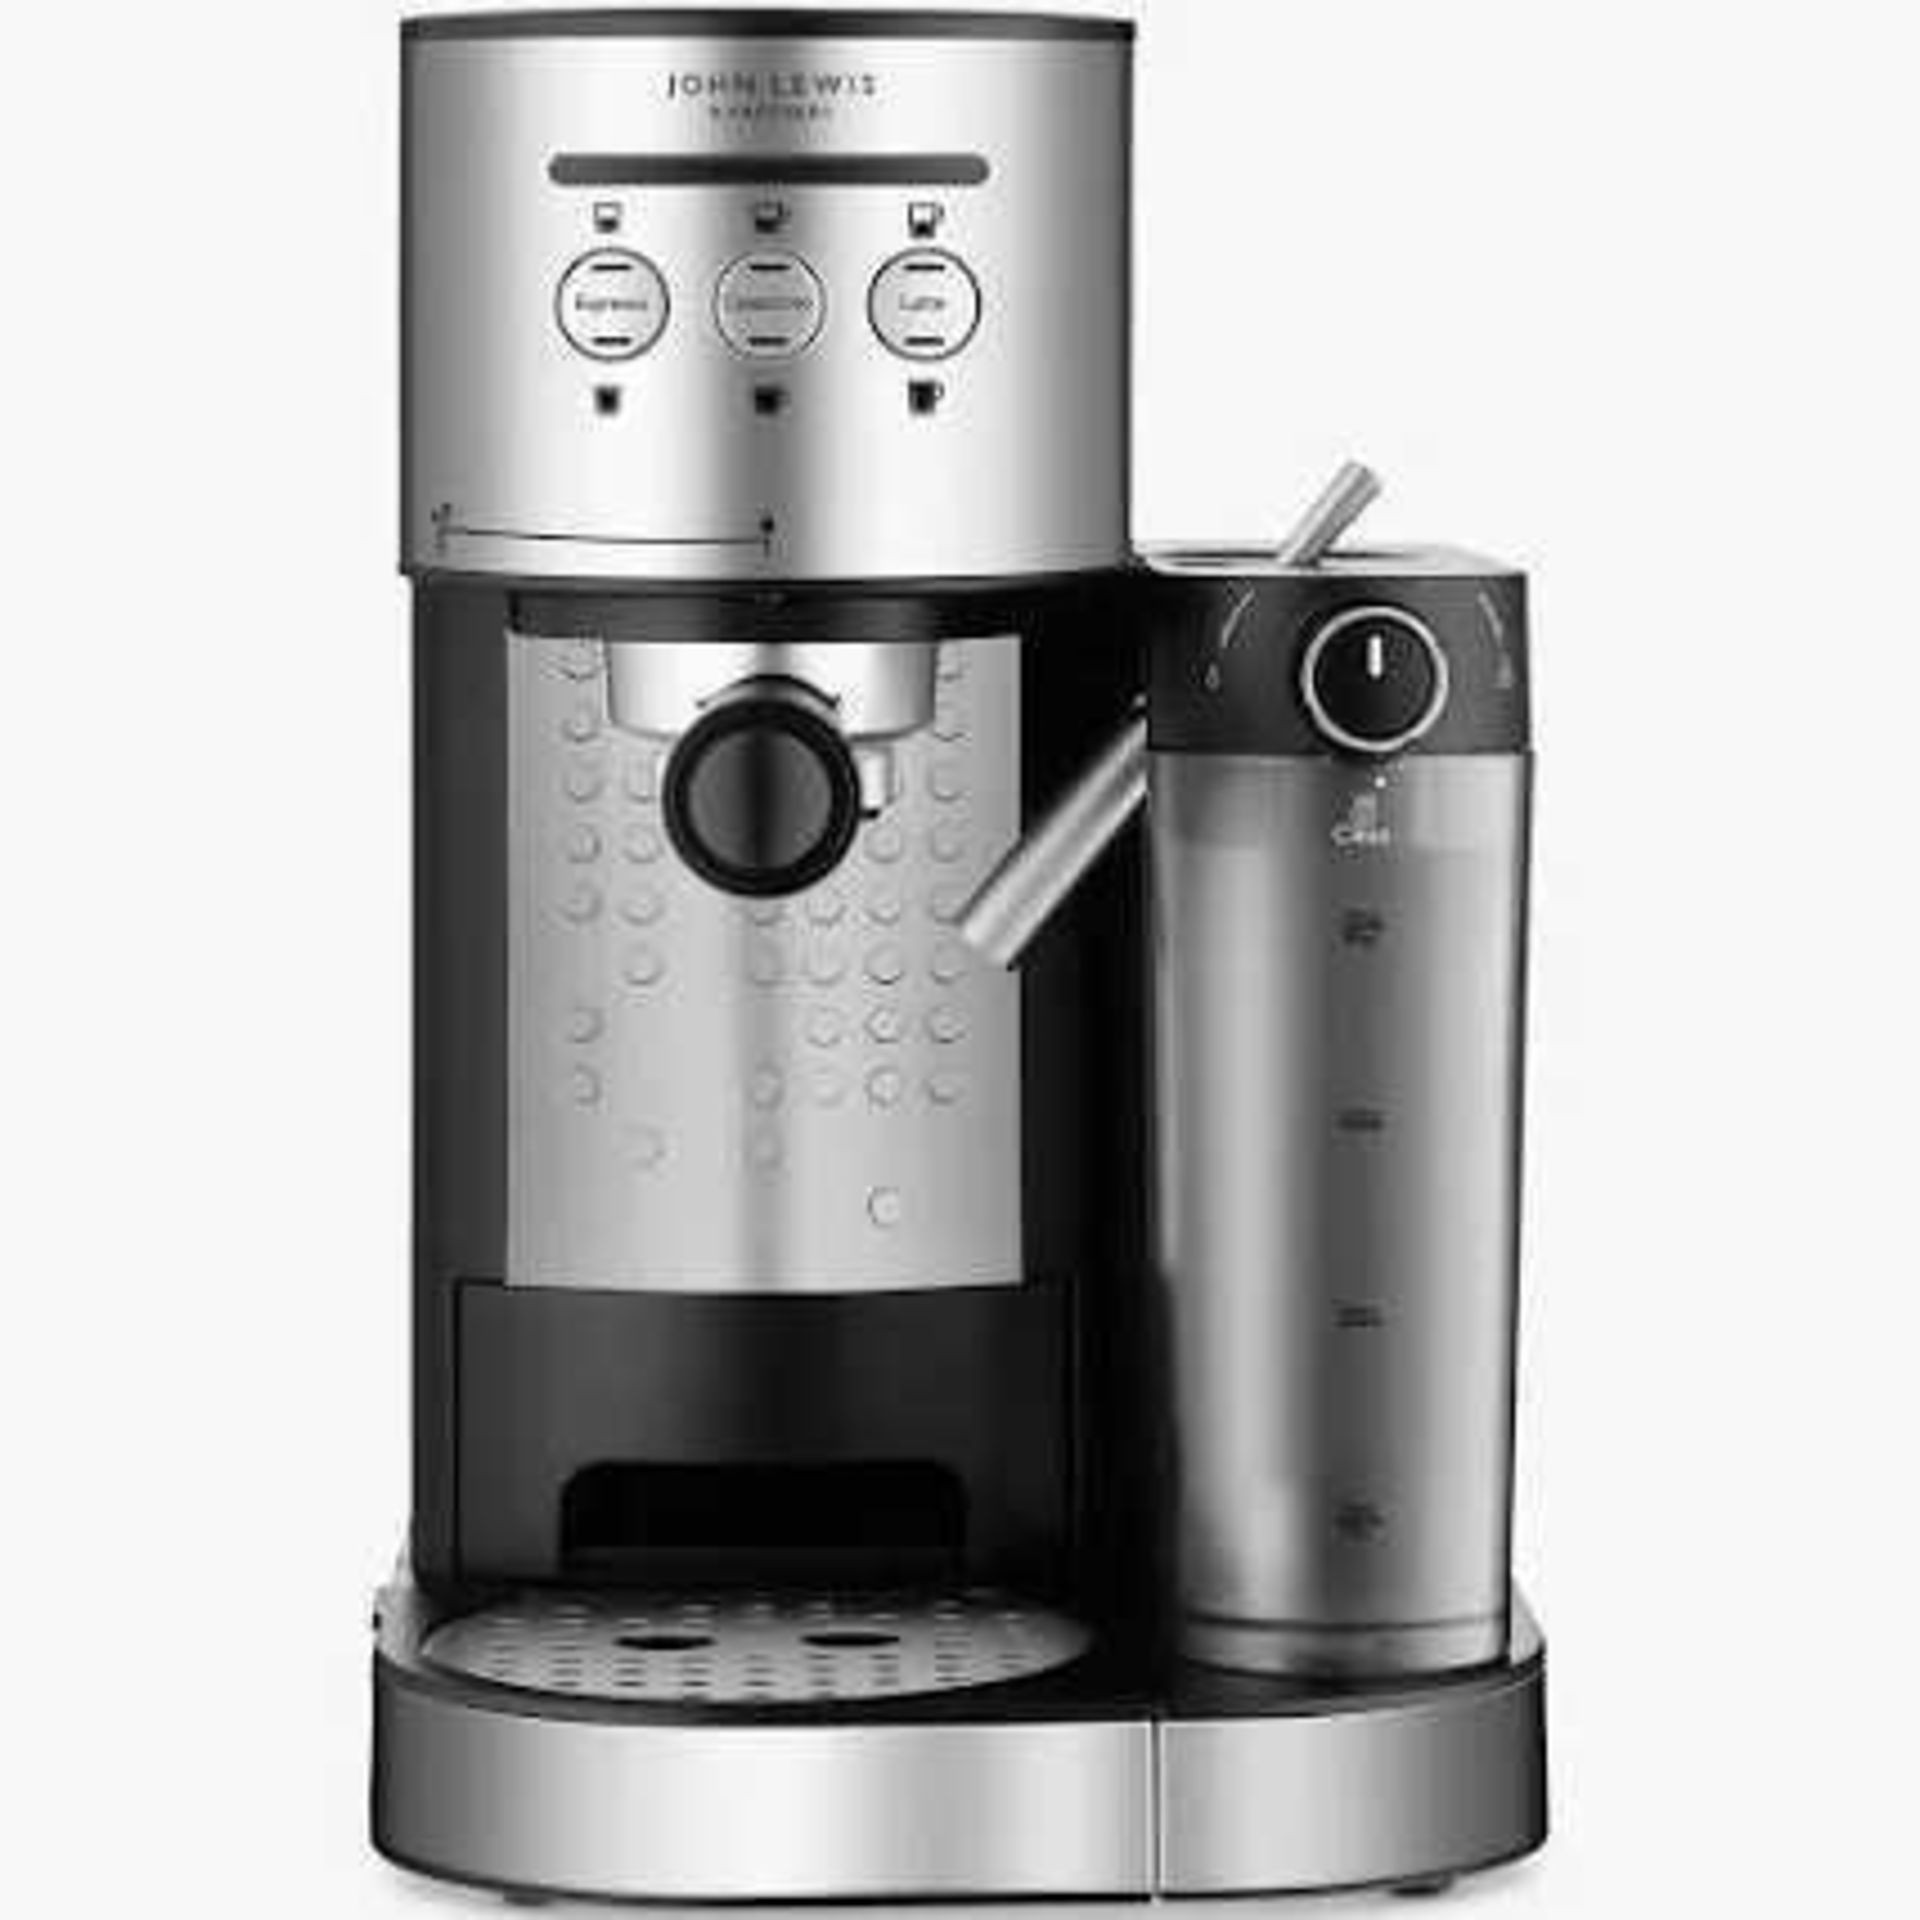 RRP £200 Lot To Contain X2 John Lewis Espresso Coffee Machines, 1 Bagged & 1 Unpackaged